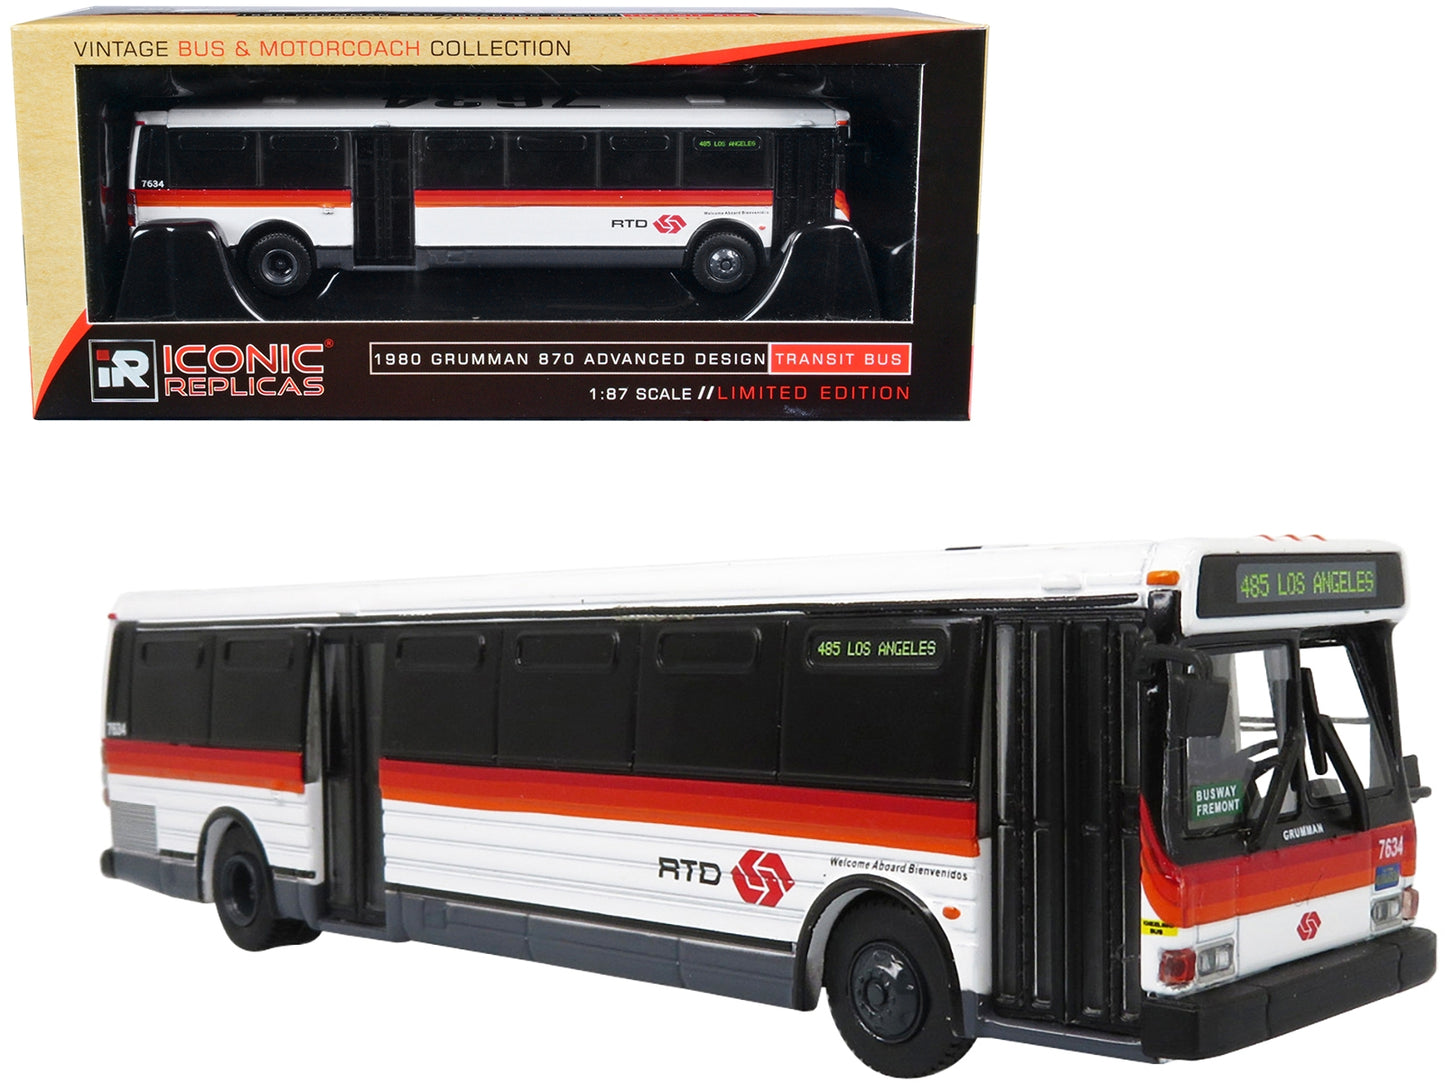 1980 Grumman 870 Advanced Design Transit Bus Southern California Rapid Transit District "485 Los Angeles" "Vintage Bus & Motorcoach Collection" 1/87 Diecast Model by Iconic Replicas